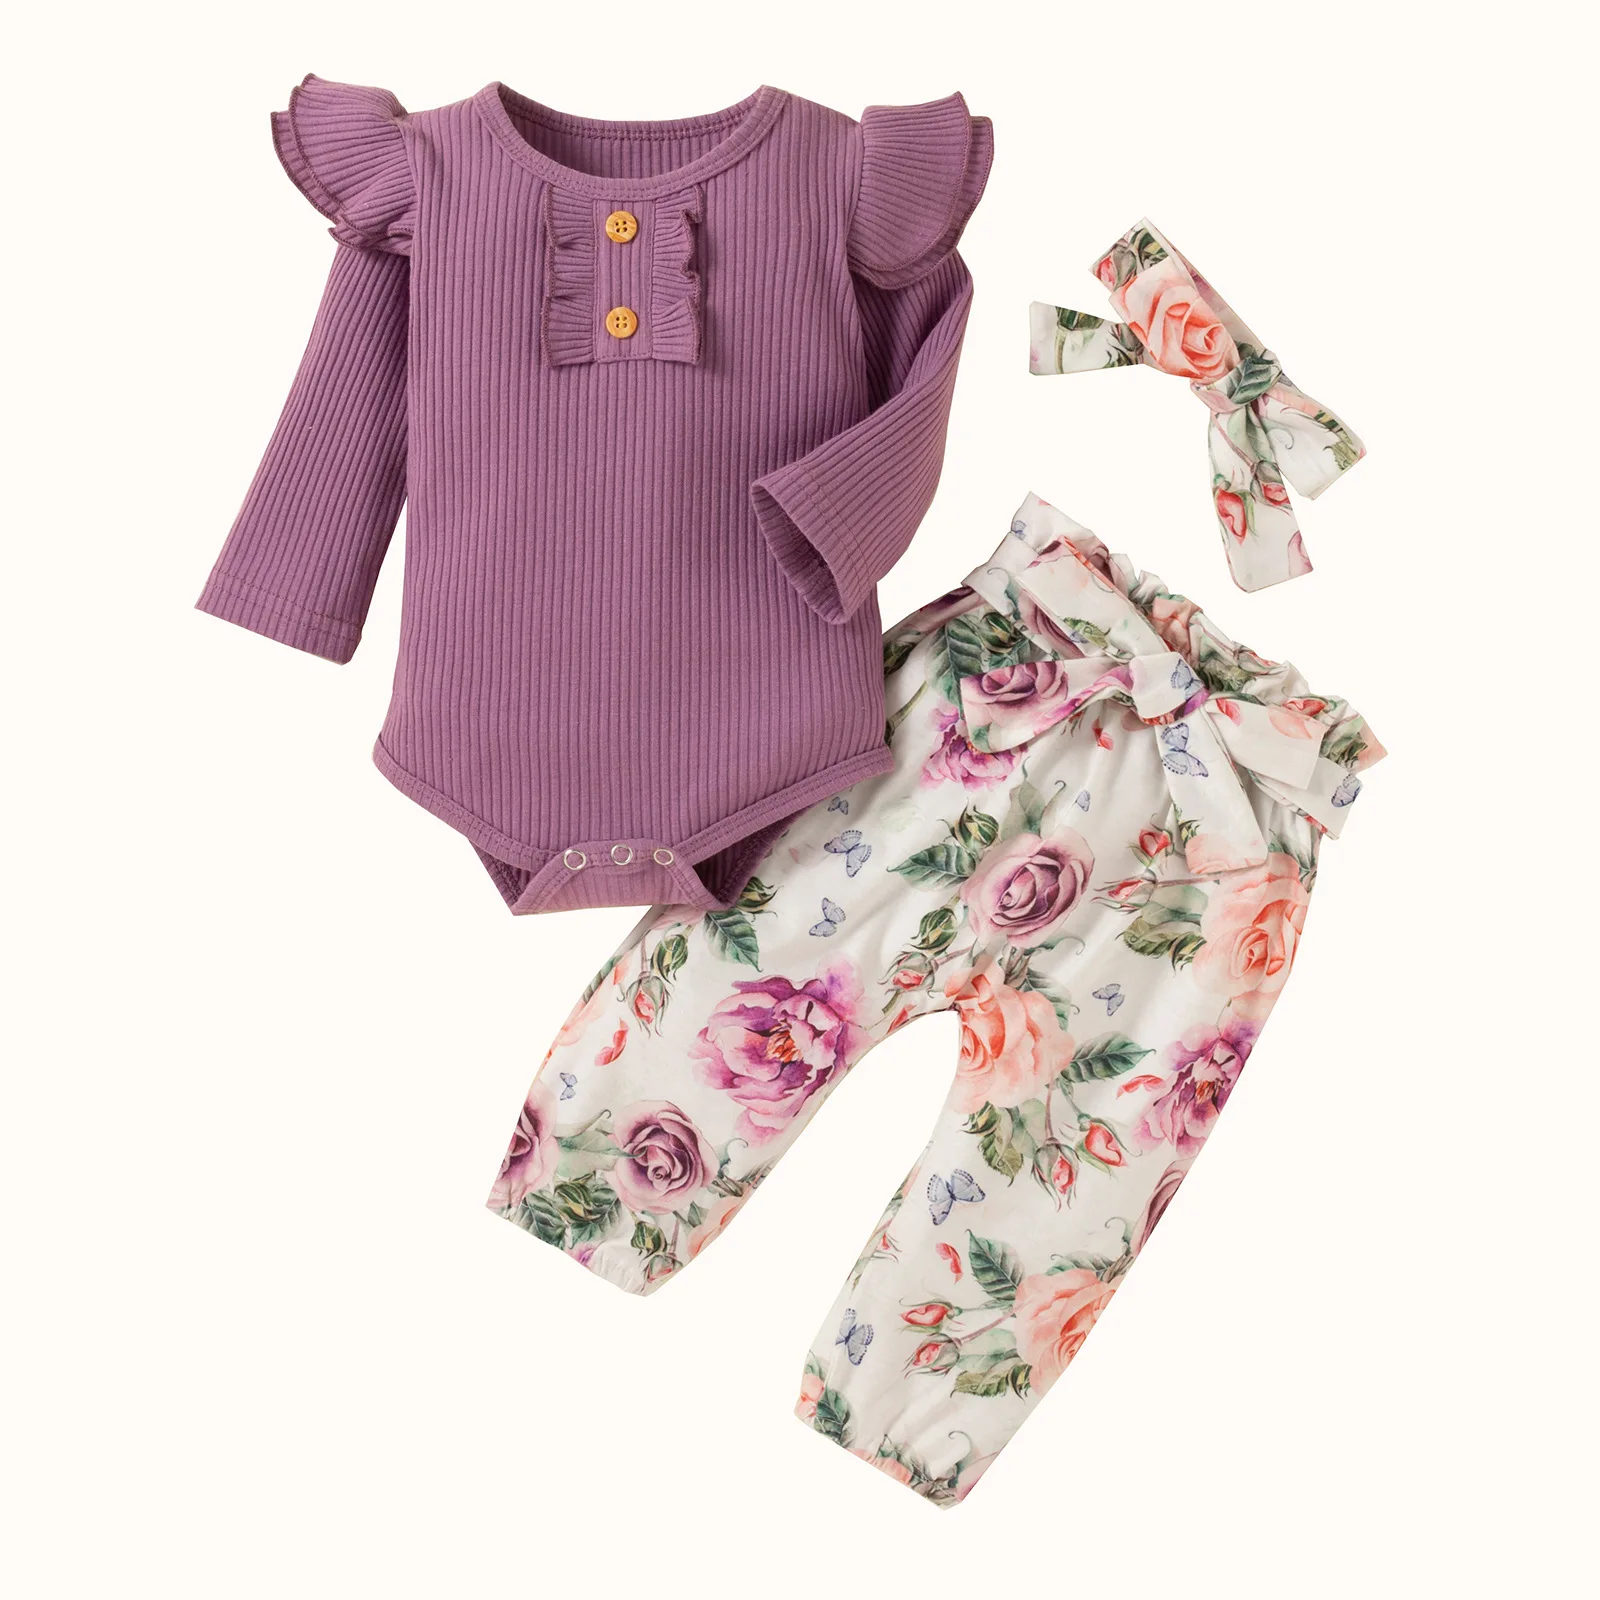 3Pcs Baby Girl Clothes Set New Born Clothing Toddler Outfits Newborn Girls Clothes Ruffle Romper + Floral Pants + Headband newborn baby clothing set Baby Clothing Set